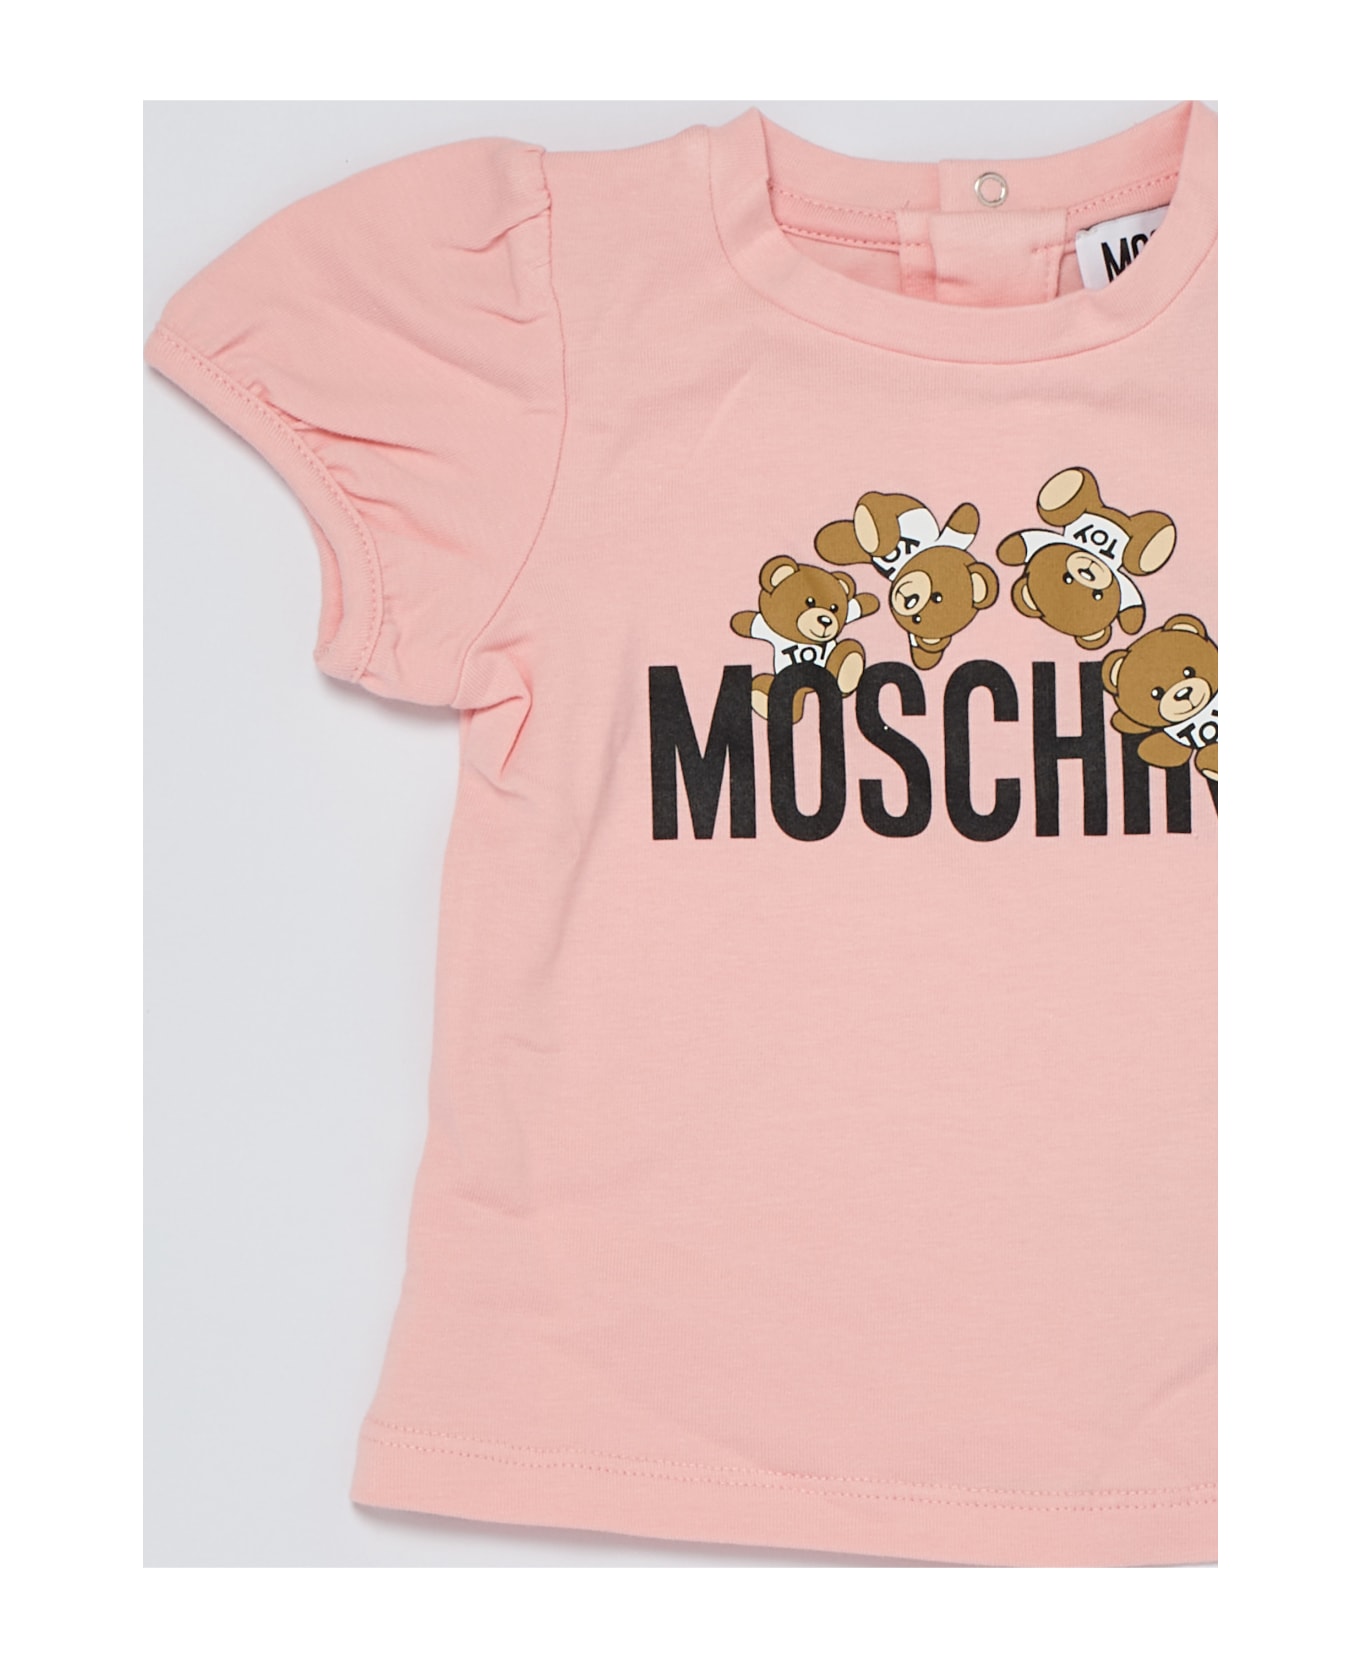 Moschino Suit Suit (tailleur) - ROSA-BIANCO ボディスーツ＆セットアップ